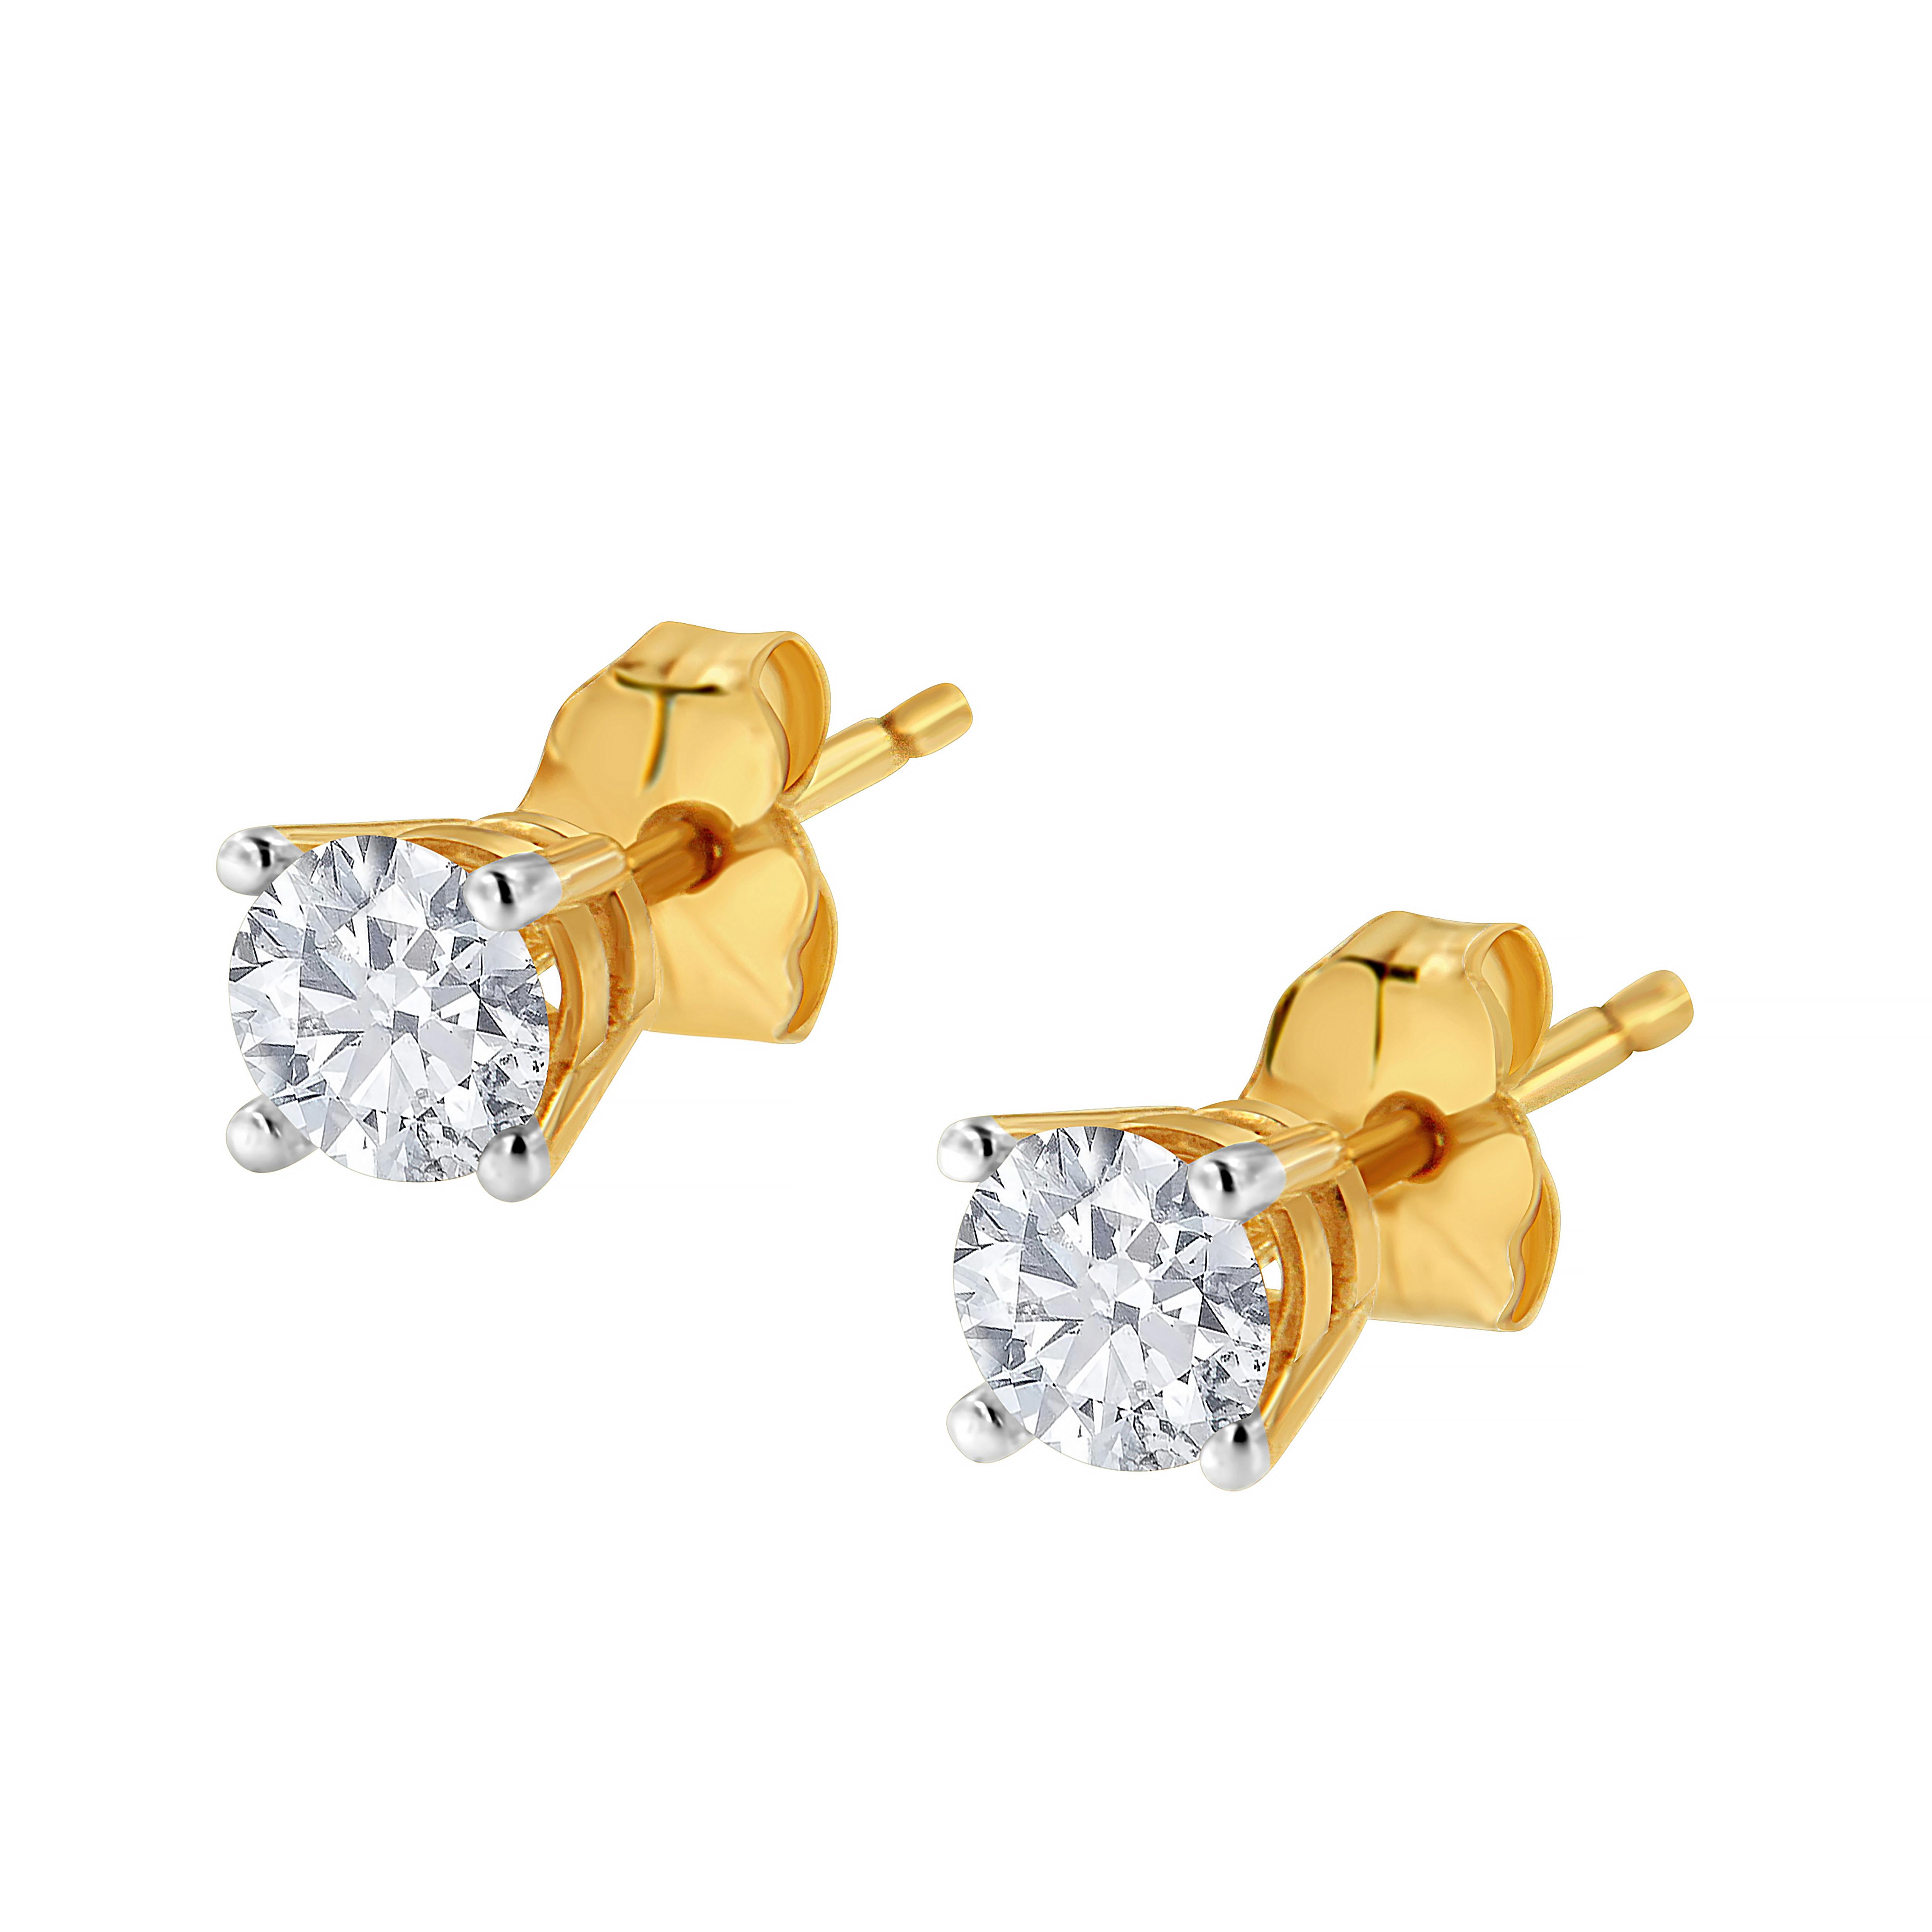 Celebrate any occasion with these classic shimmering diamond stud earrings. Crafted from 14k Yellow Gold each earring showcases a sparkling Brilliant Round-Cut Solitaire Diamond in a 4-Prong Setting. Dazzling with 3/8 cttw of diamonds and a bright